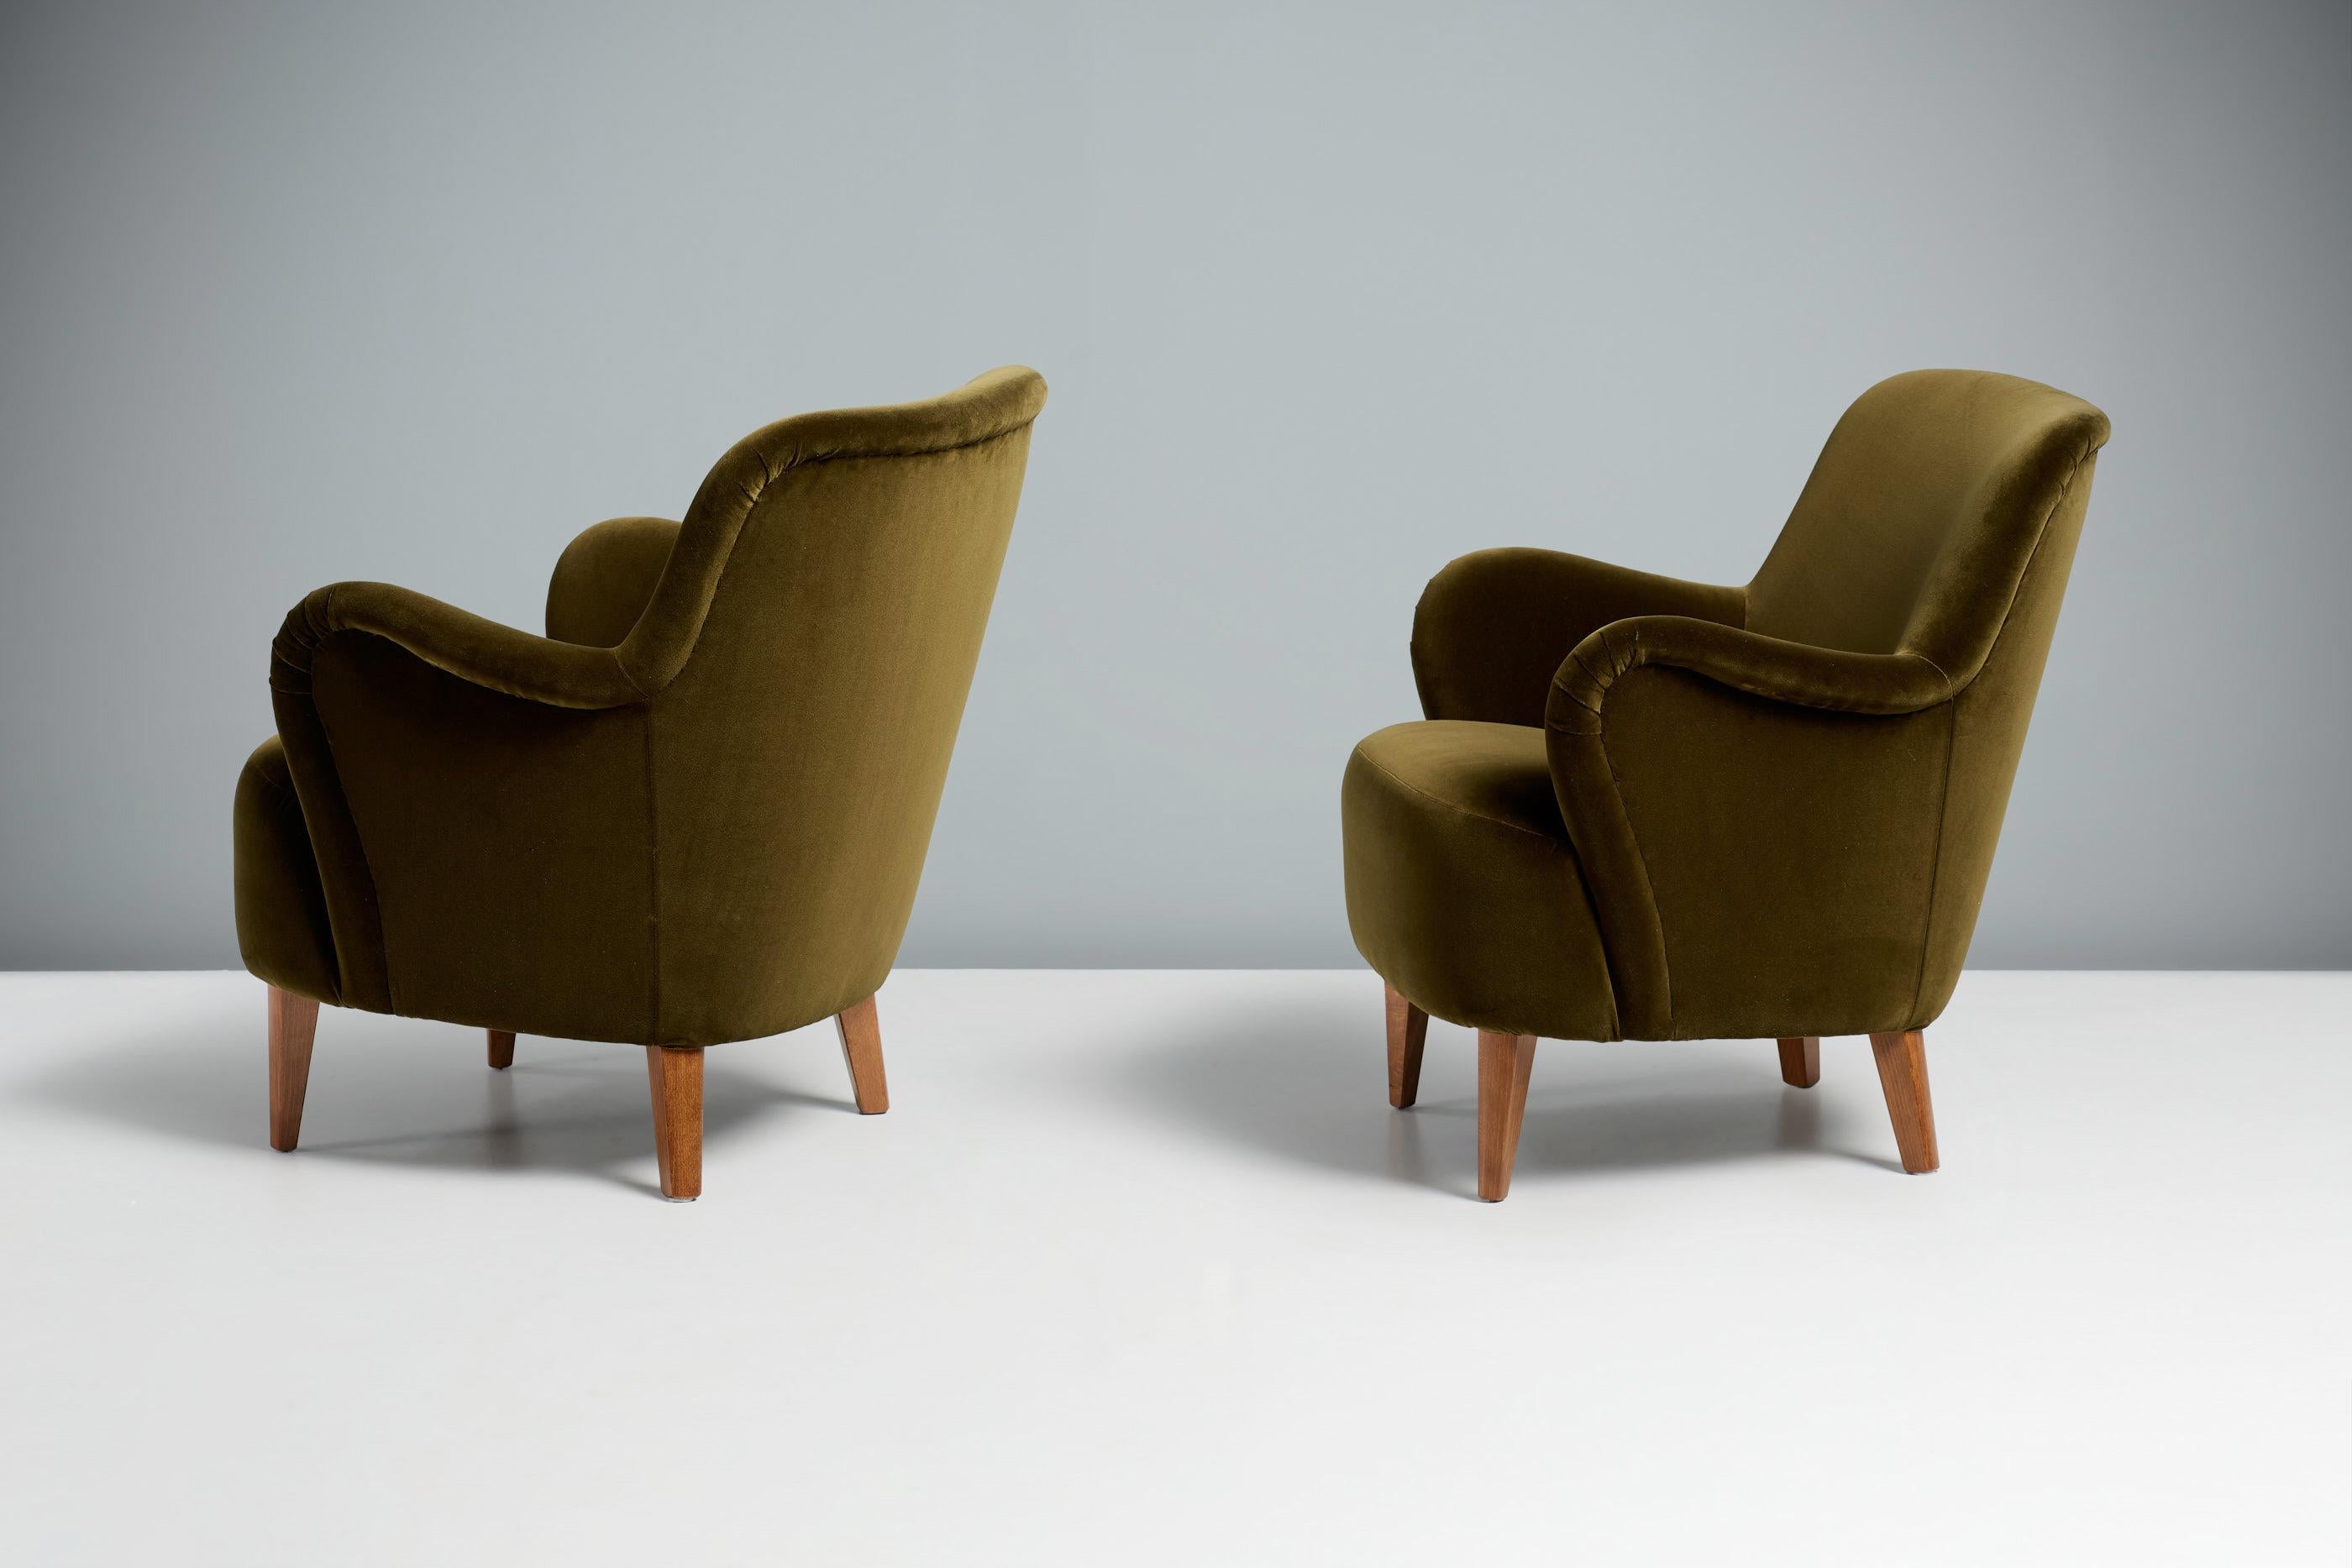 Dagmar - Albin Lounge Chair

A pair of custom-made lounge chairs developed and hand-made at our workshops in London using the highest quality materials. The Albin chair is available to order in a range of different fabrics with a choice of 3 legs